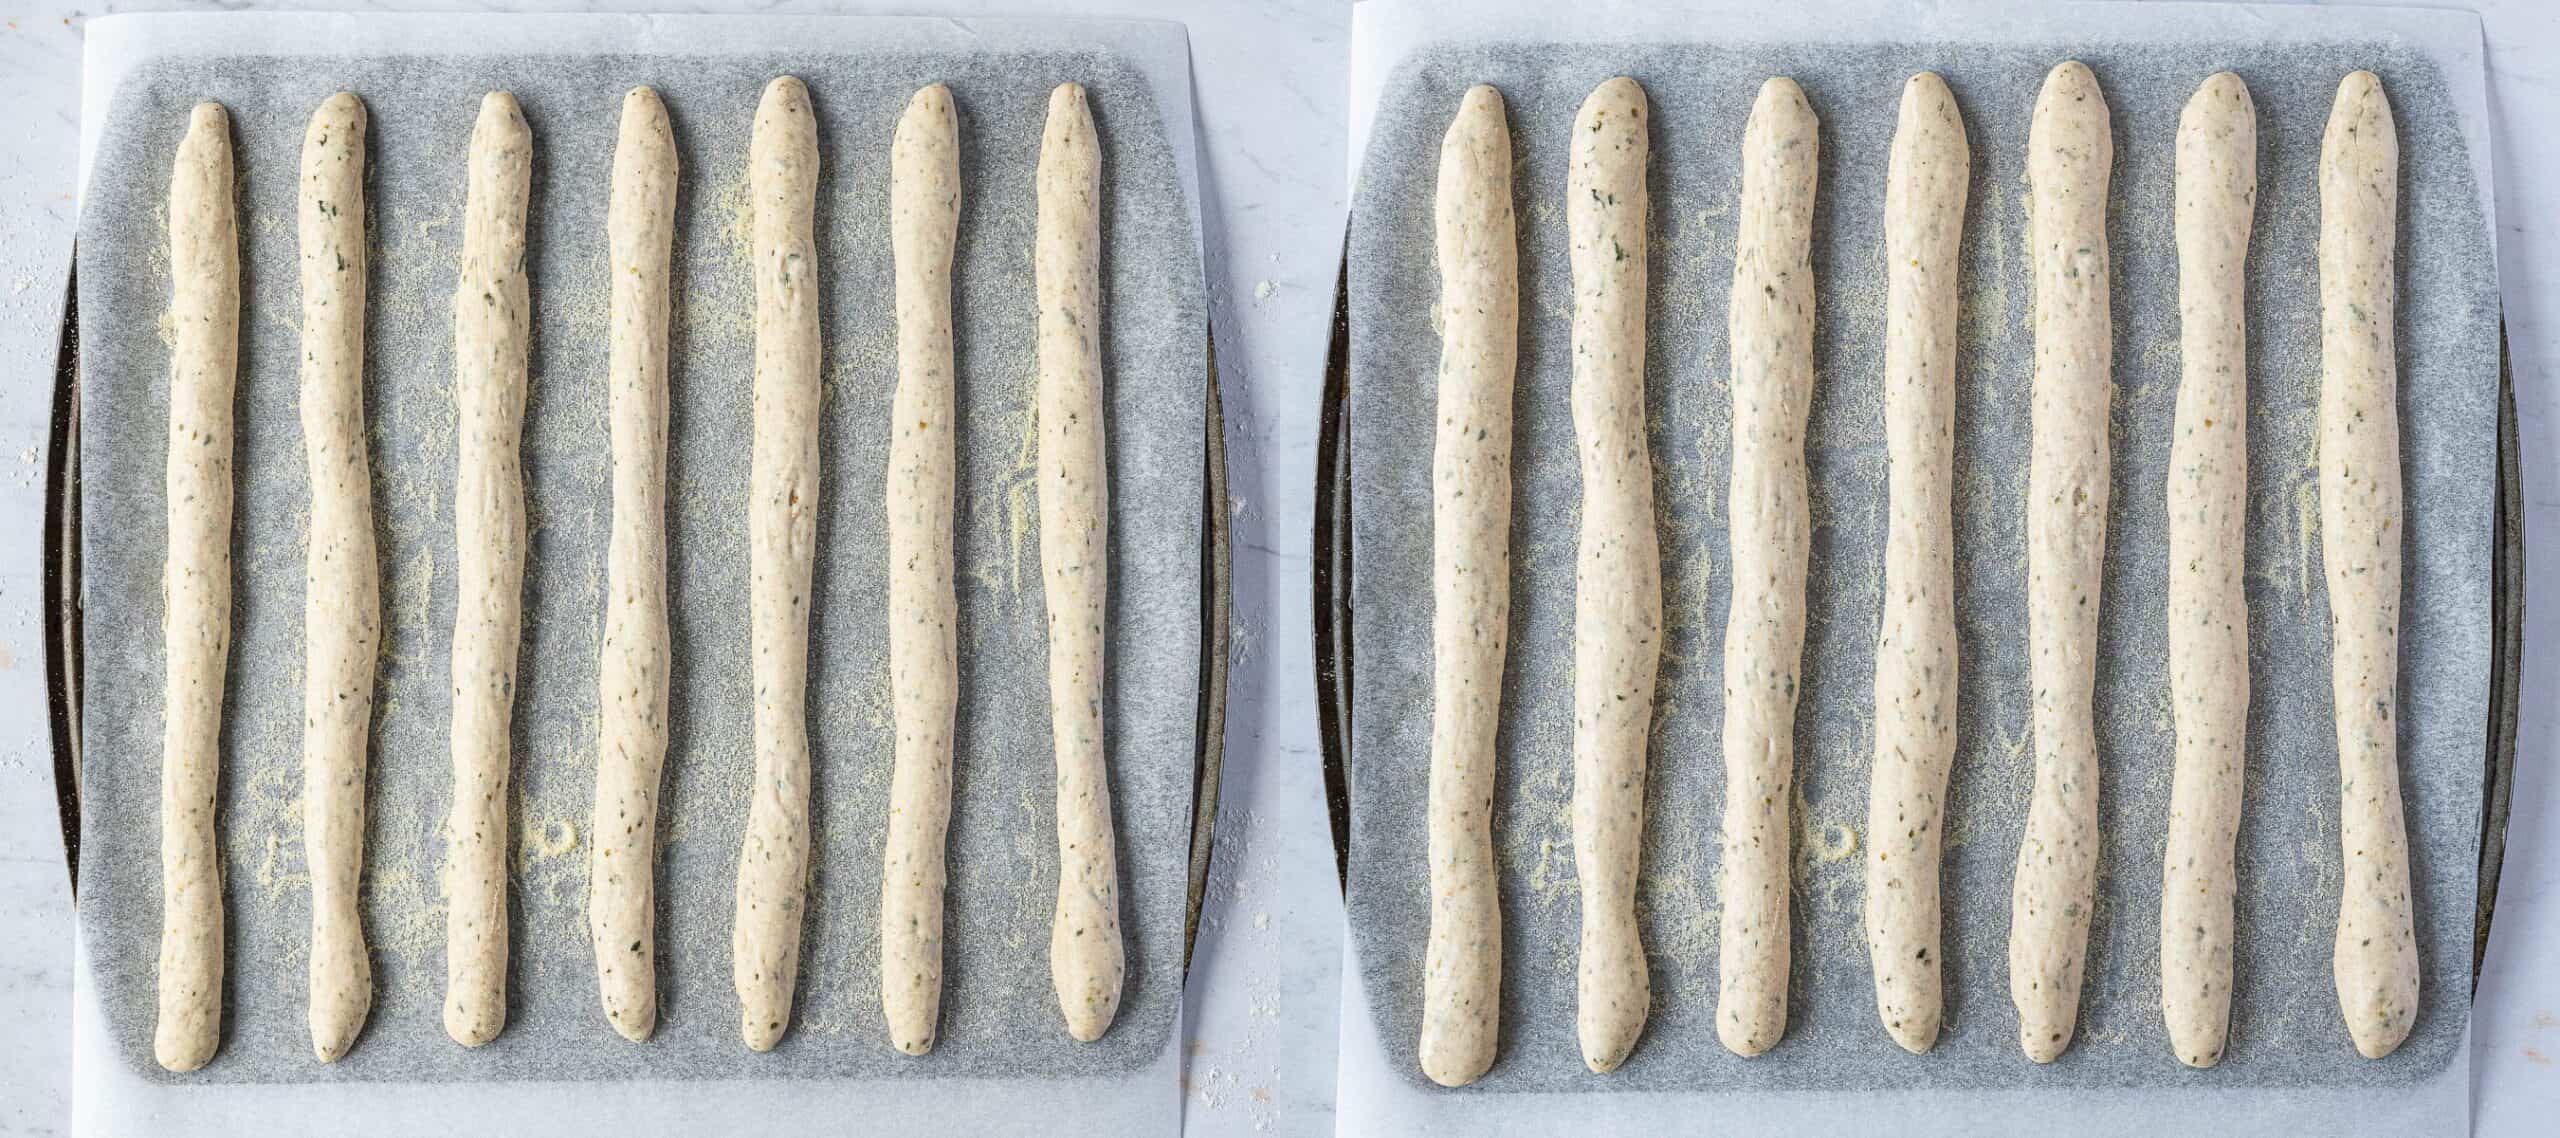 Step 5, the breadsticks before and after rising.